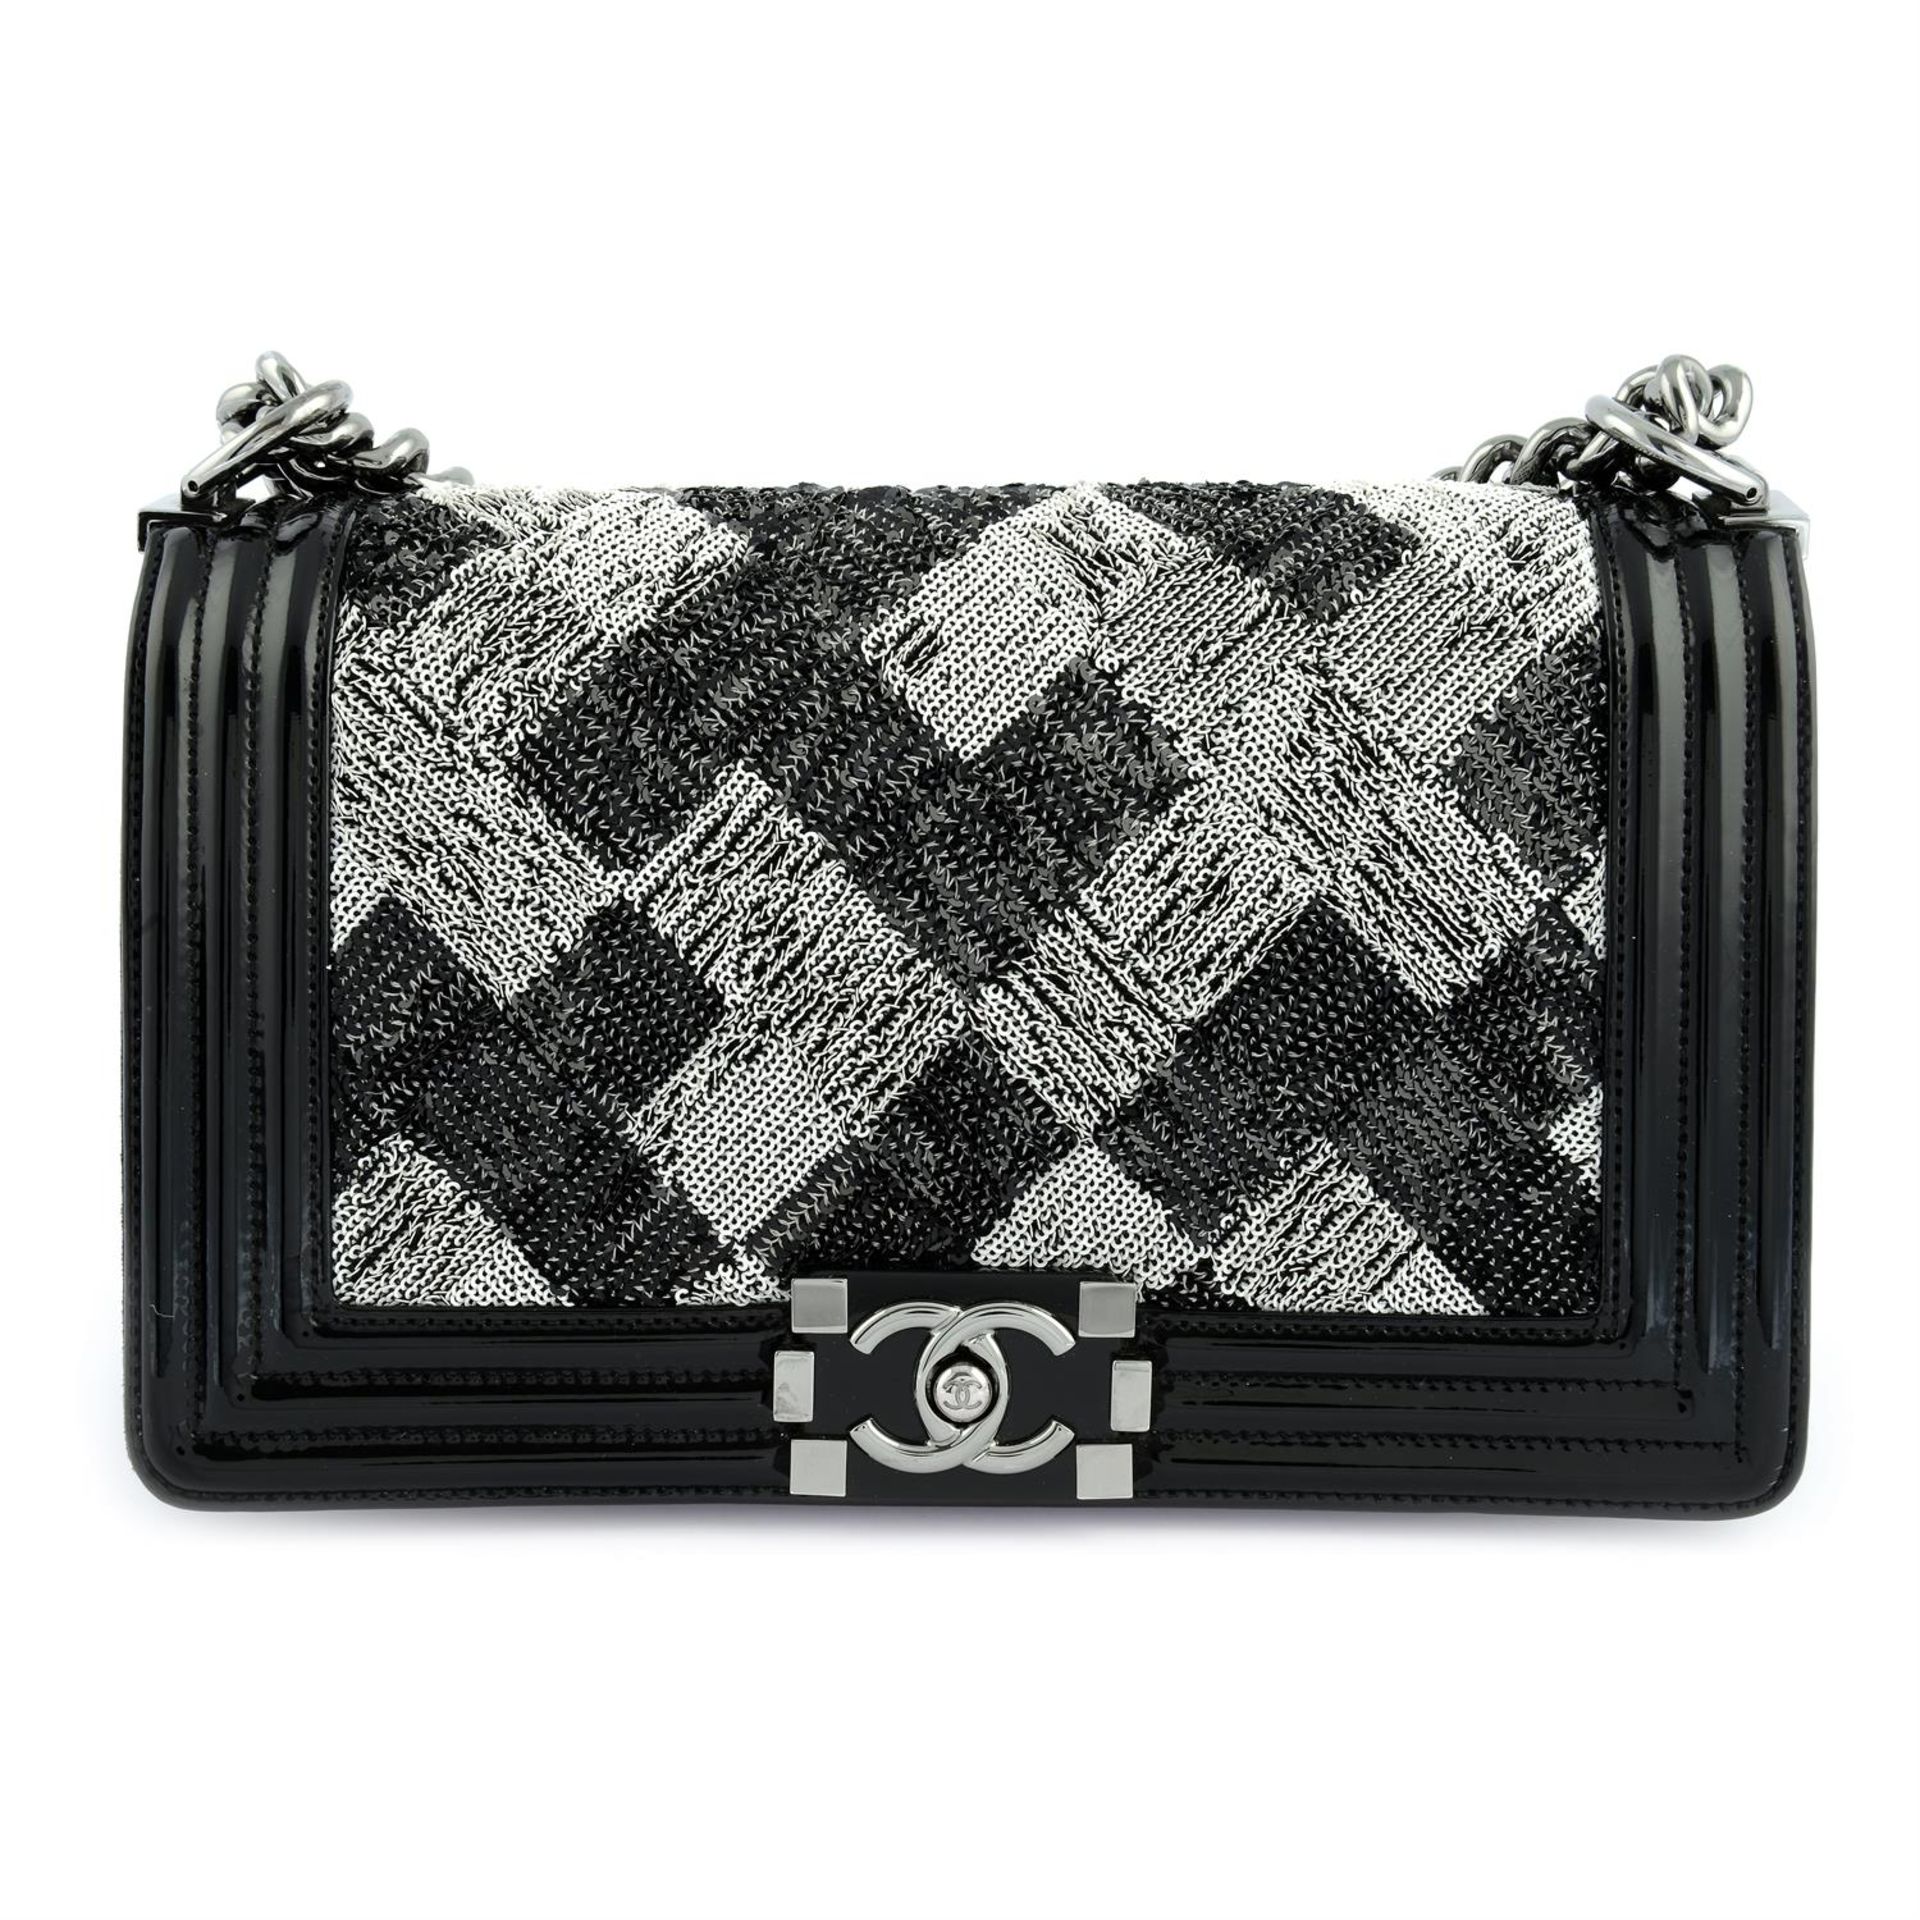 CHANEL- a patent leather sequin boy bag.